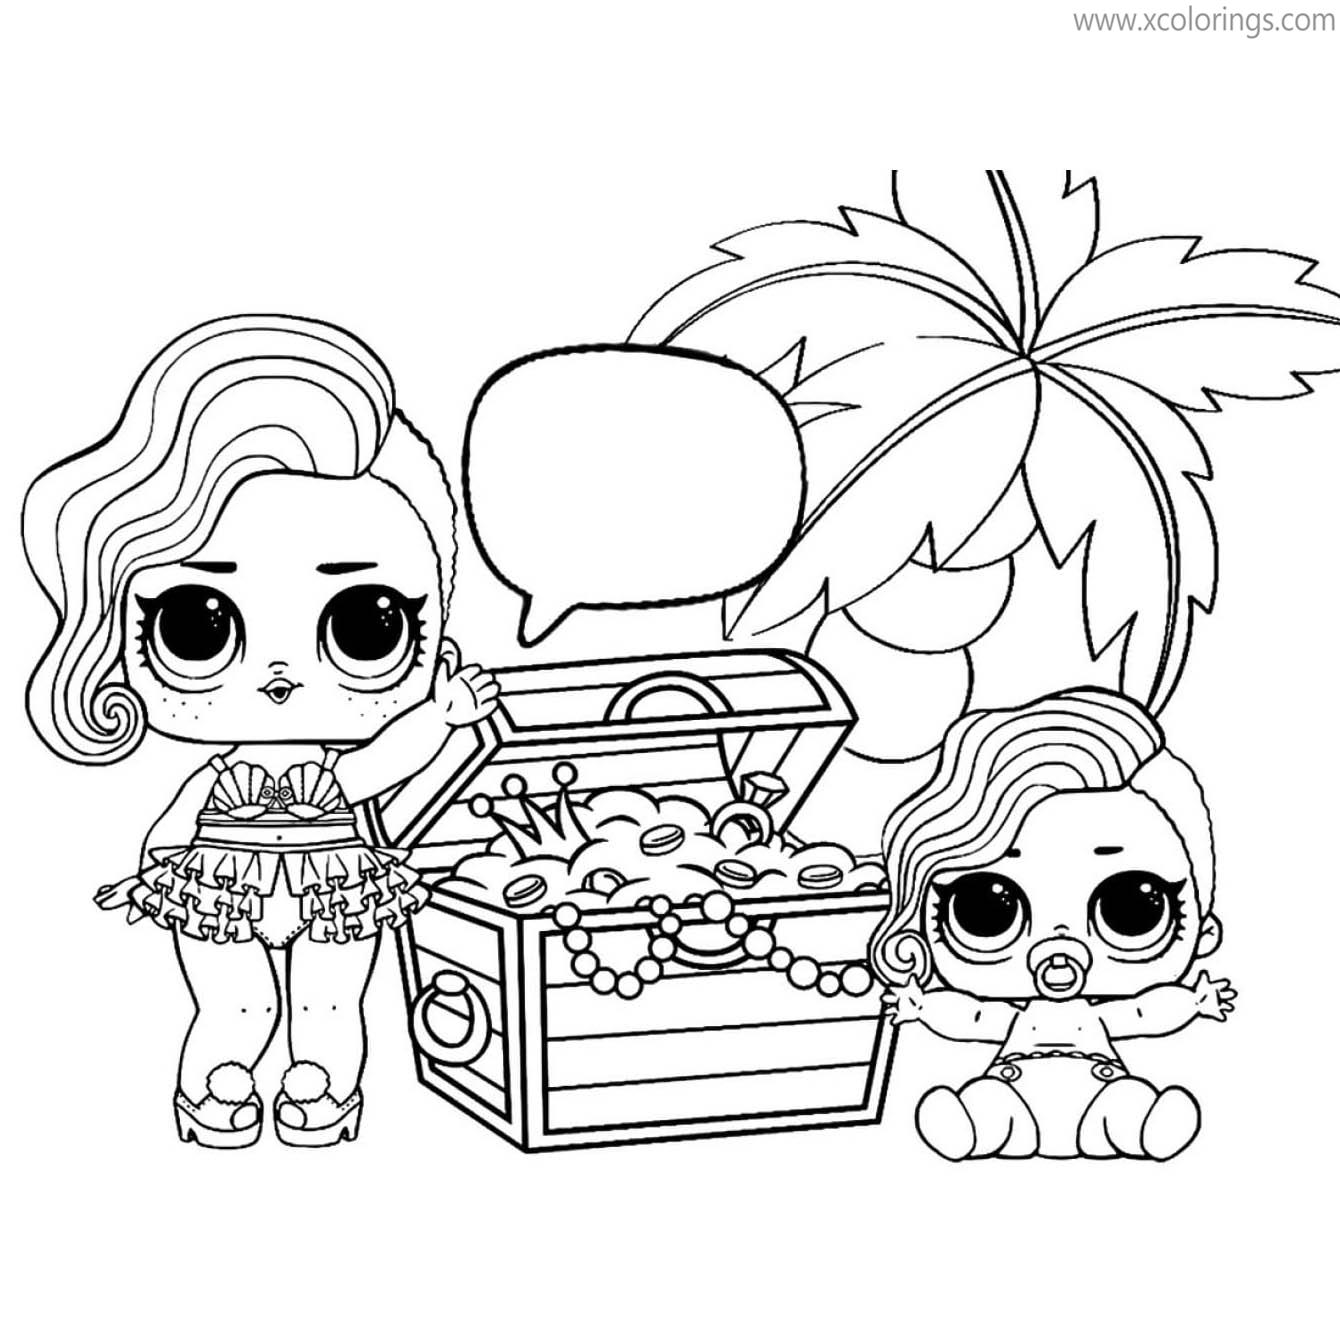 Lol Baby Doll Coloring Pages Xcolorings Com Coloriage lol pet page cherry hamster animaux. lol baby doll coloring pages